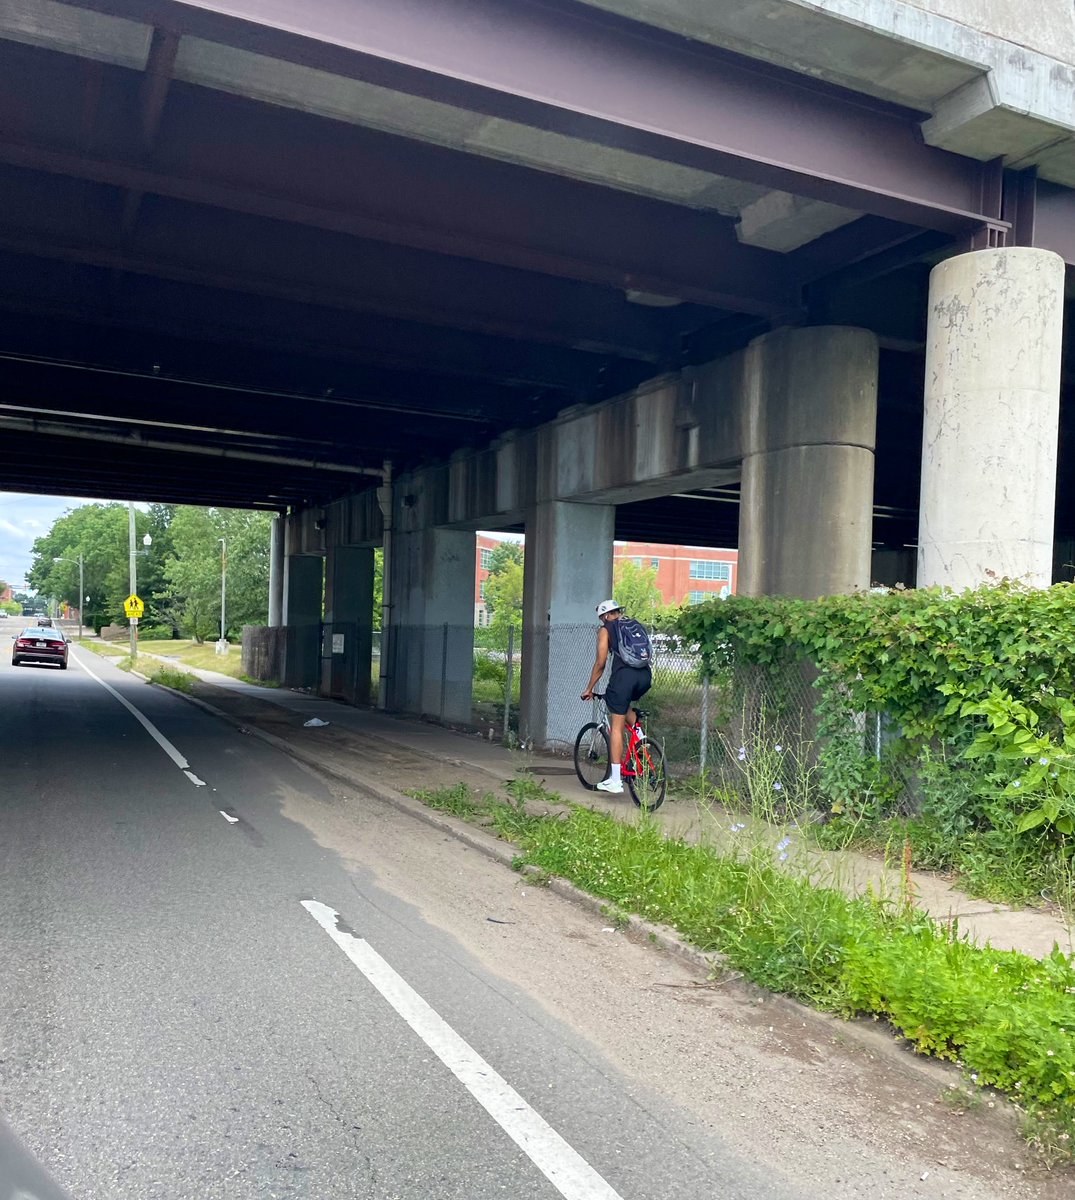 If you see someone riding their bike on the sidewalk, it’s not because they are a lawless scofflaw—it’s because the infrastructure doesn’t make them feel safe enough to ride in the road.